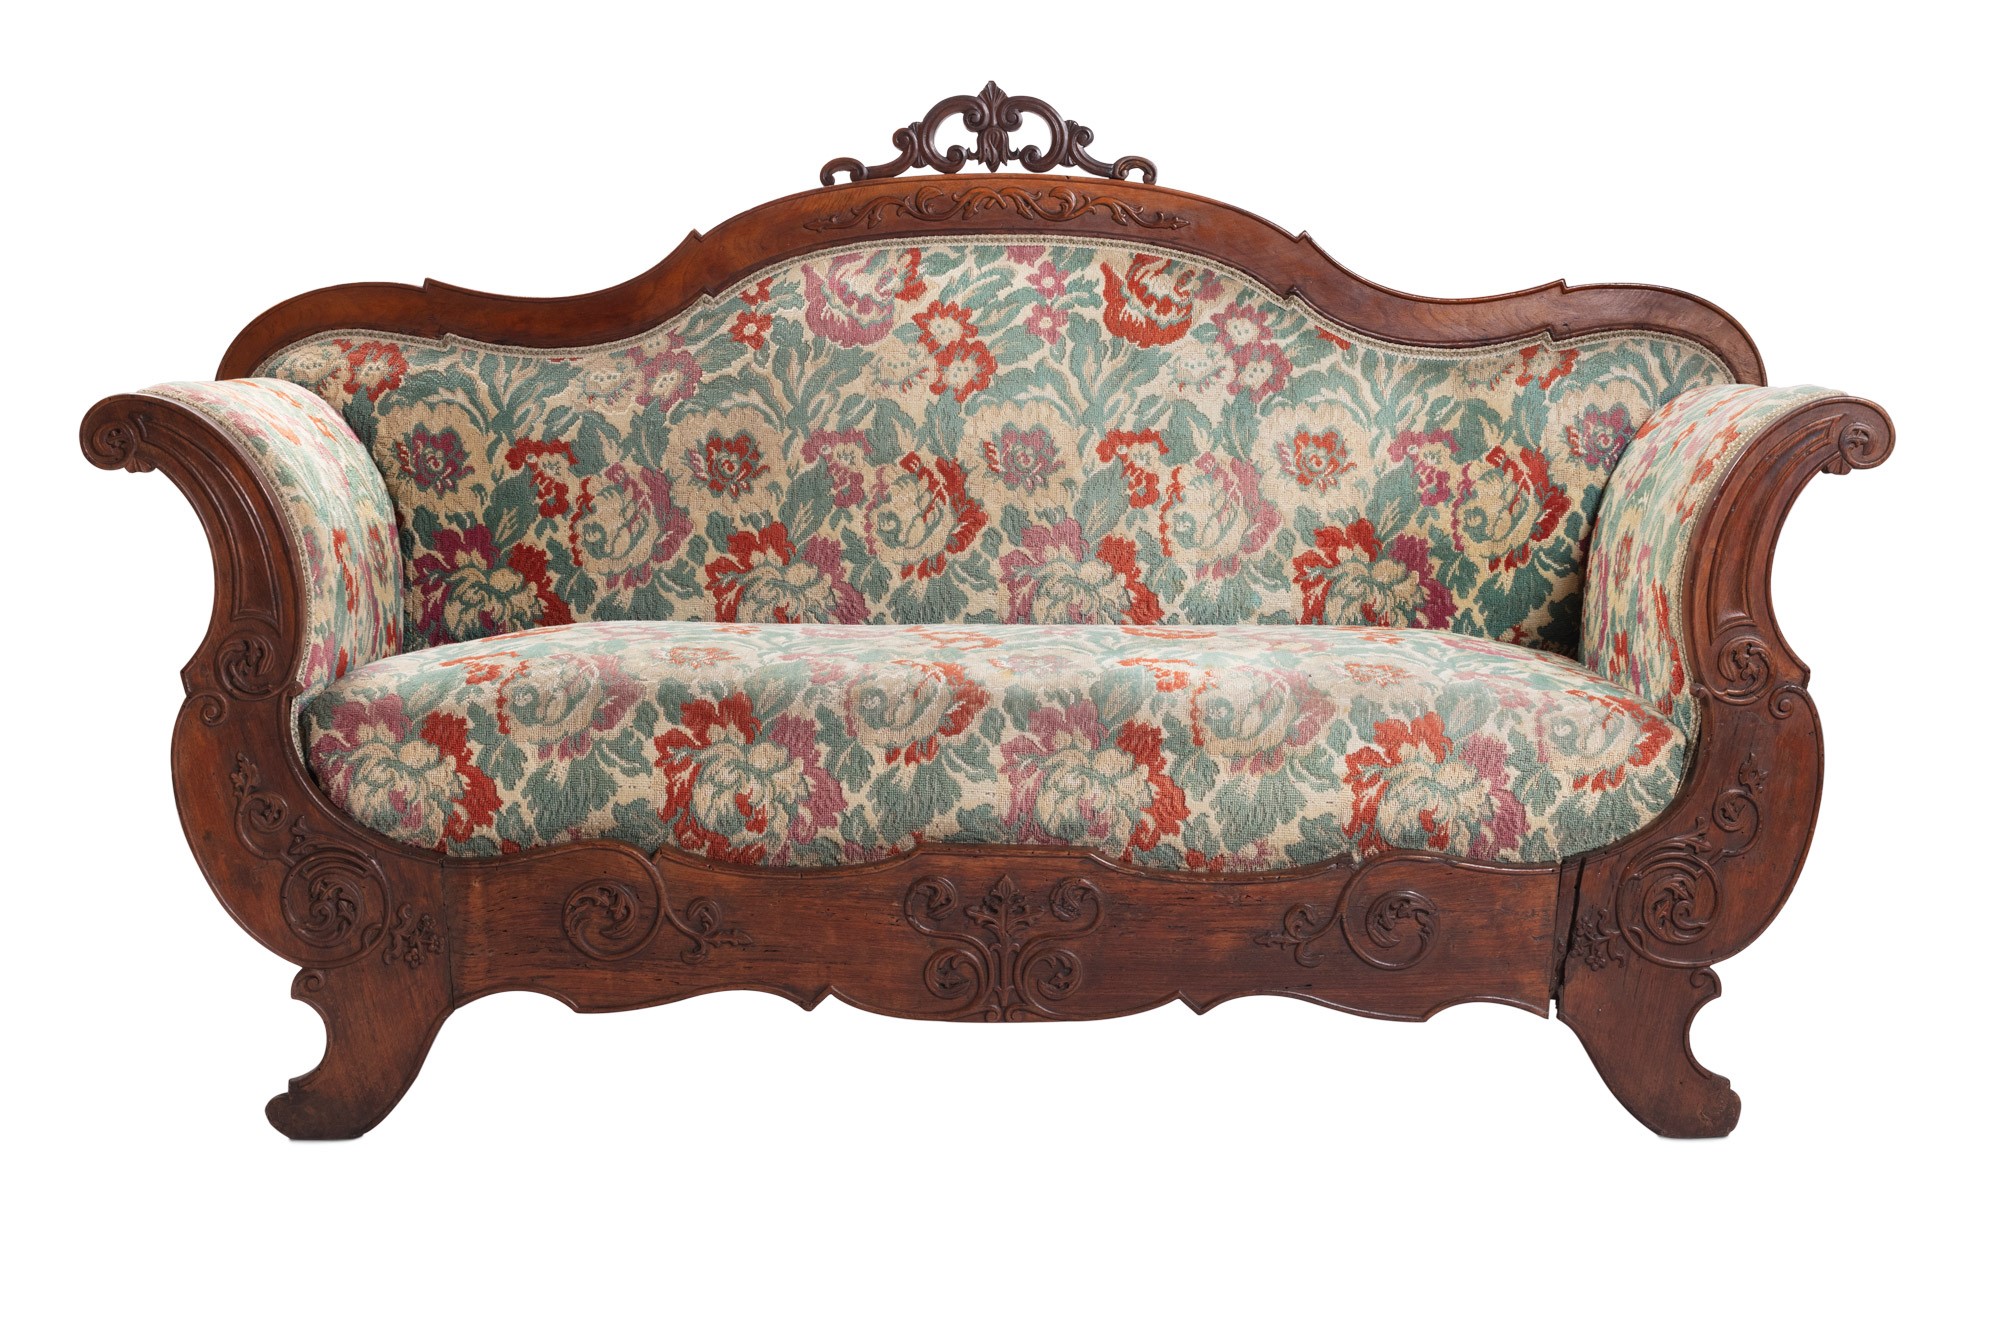 Walnut wood sofa manifacture ligure, mid 19th century, shaped armrests and back, curly feet, - Image 2 of 12